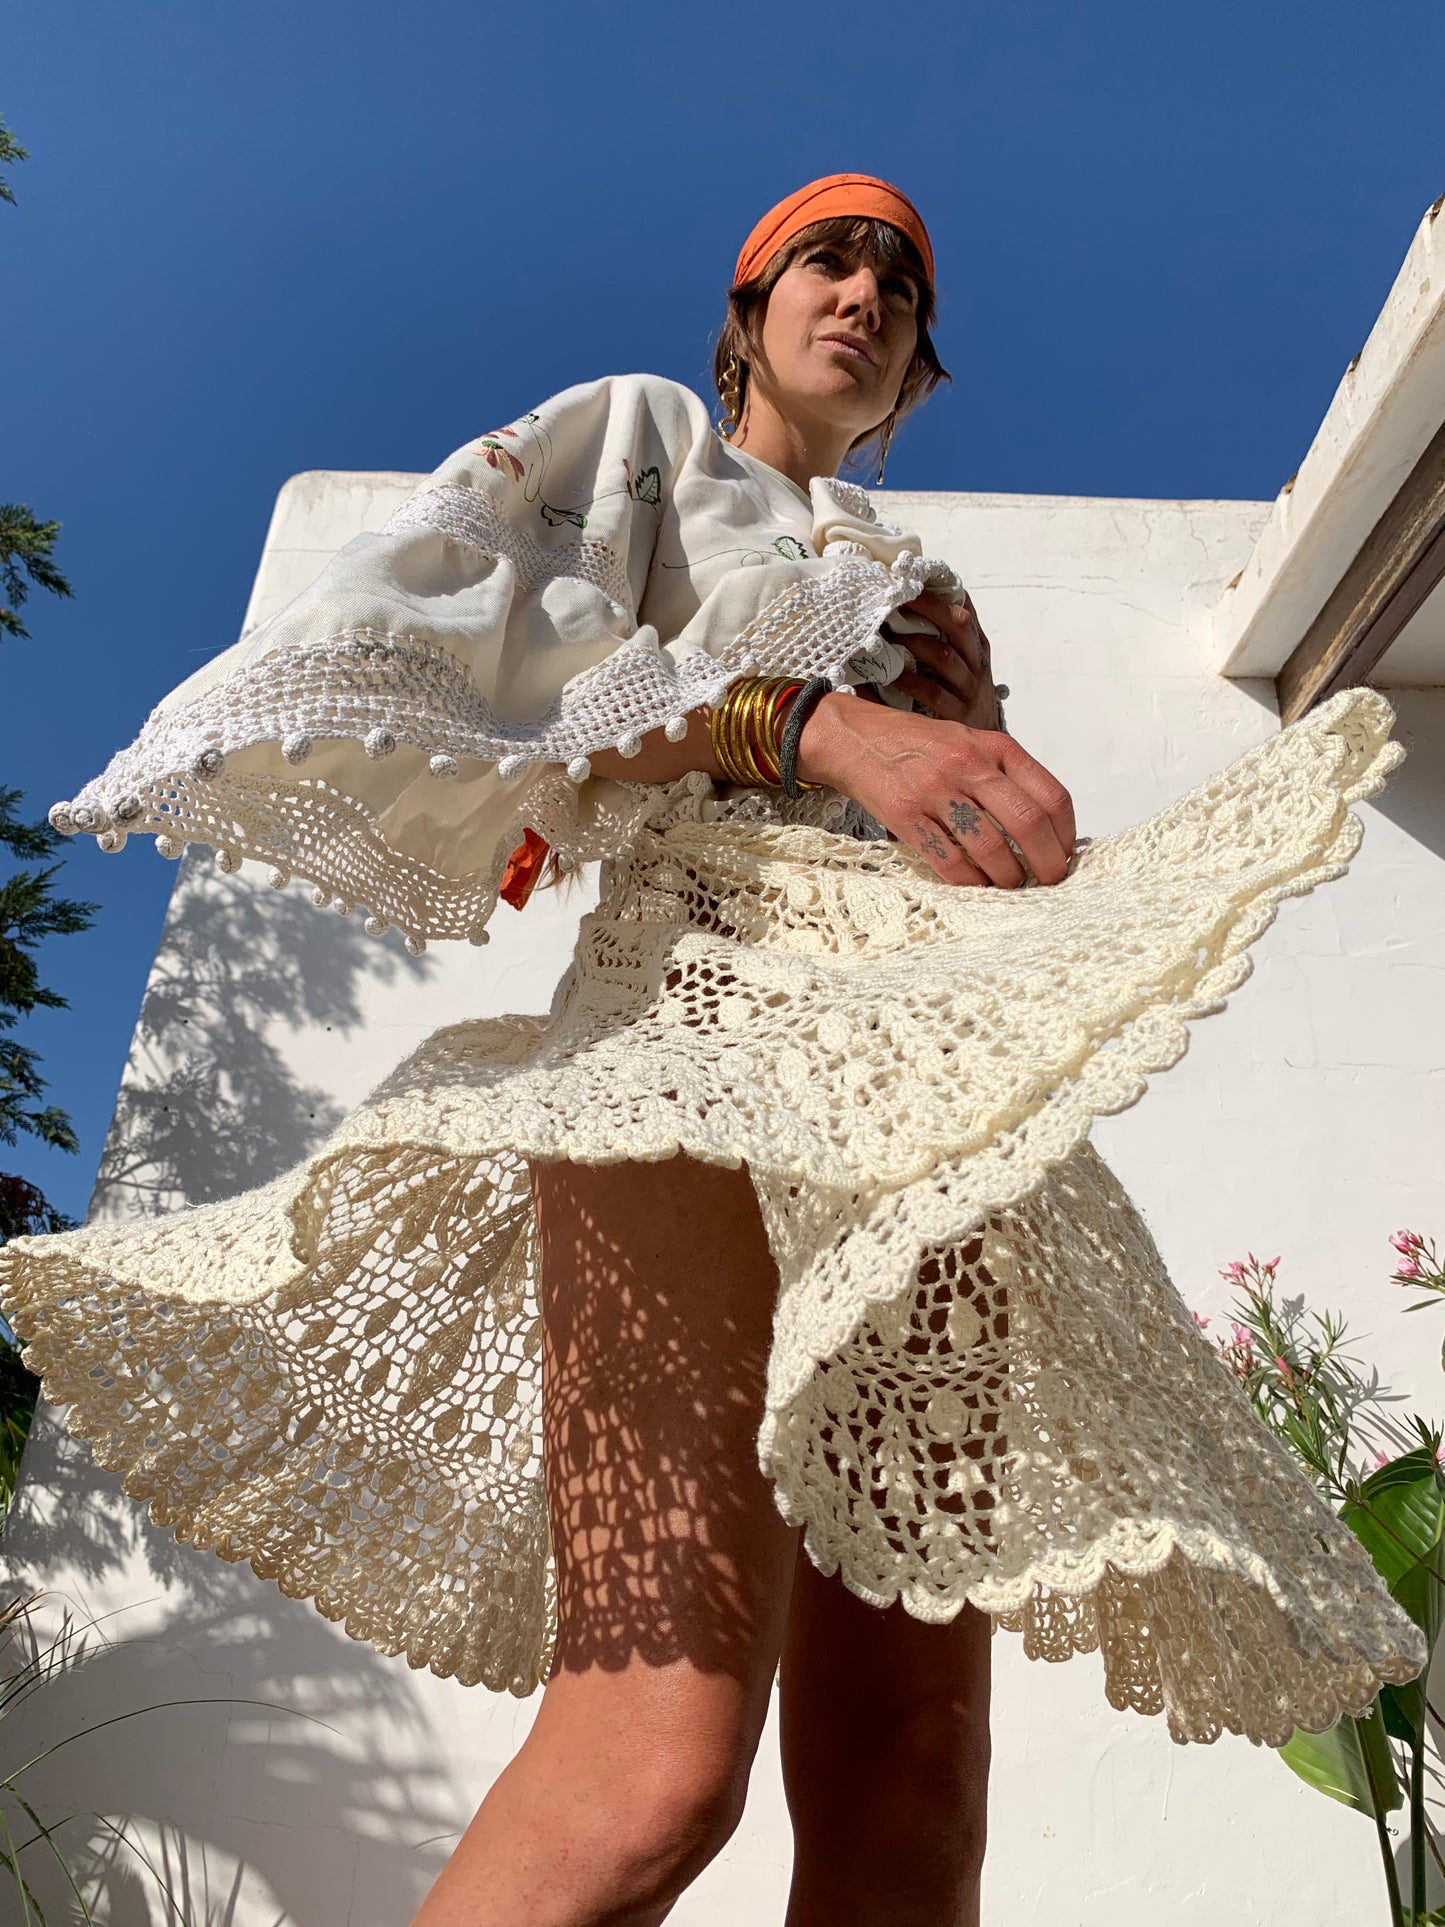 Antique lace crochet skirt up-cycled by Vagabond Ibiza